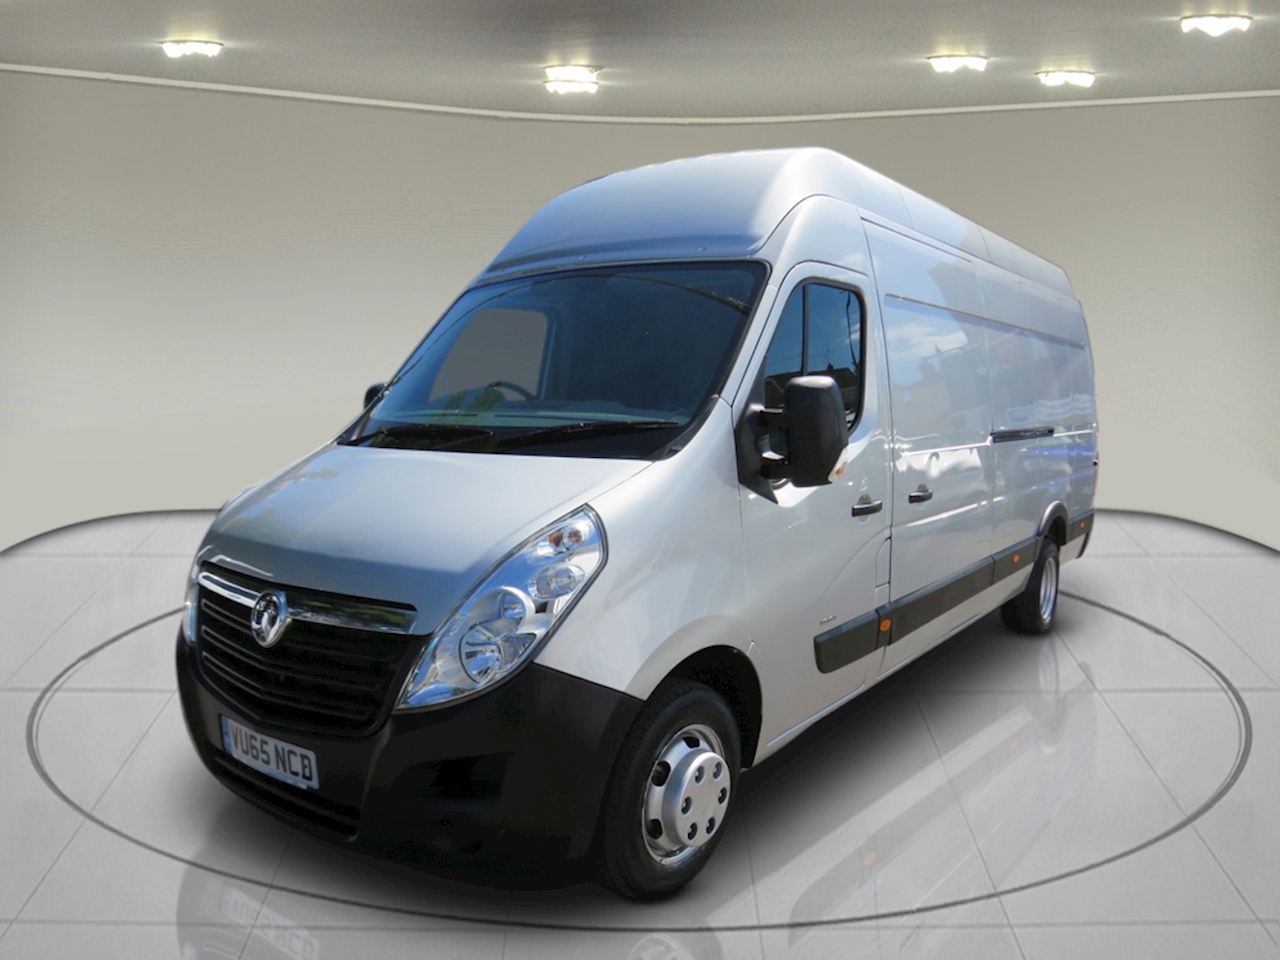 Real Road Test: 2015 Vauxhall Movano! (Renault Master, Opel Movano